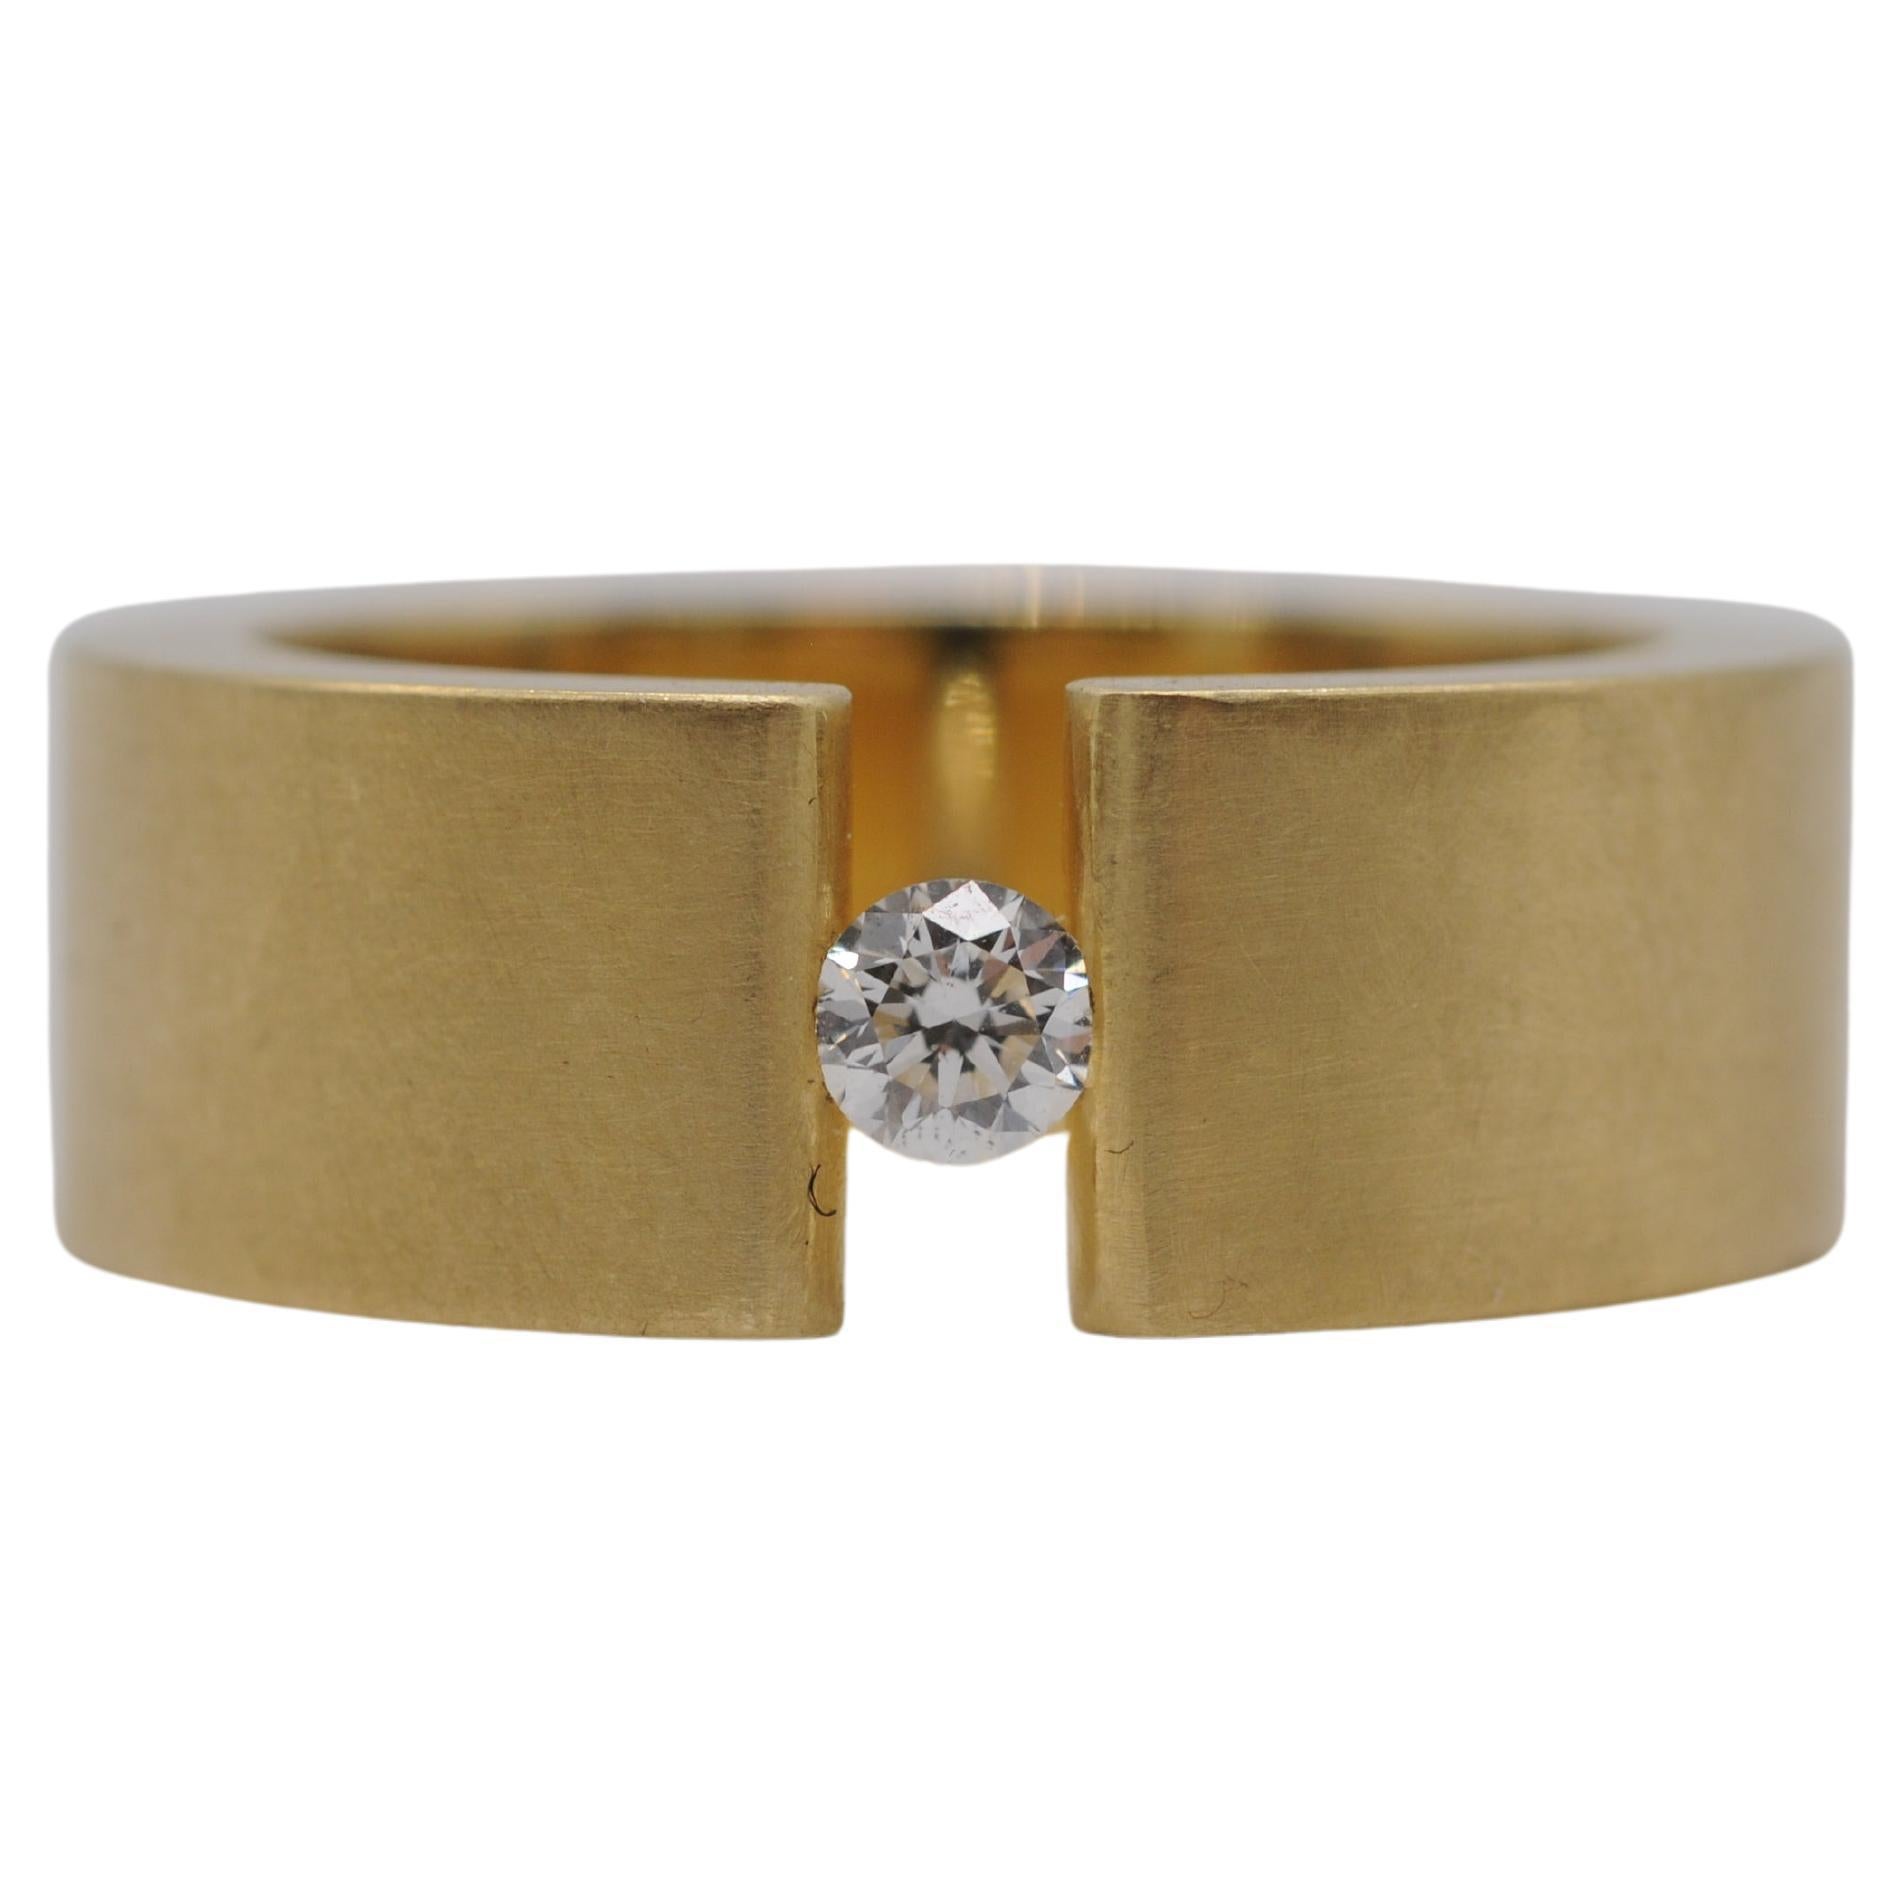 Niessing tension ring in 18k yellow gold with a brilliant